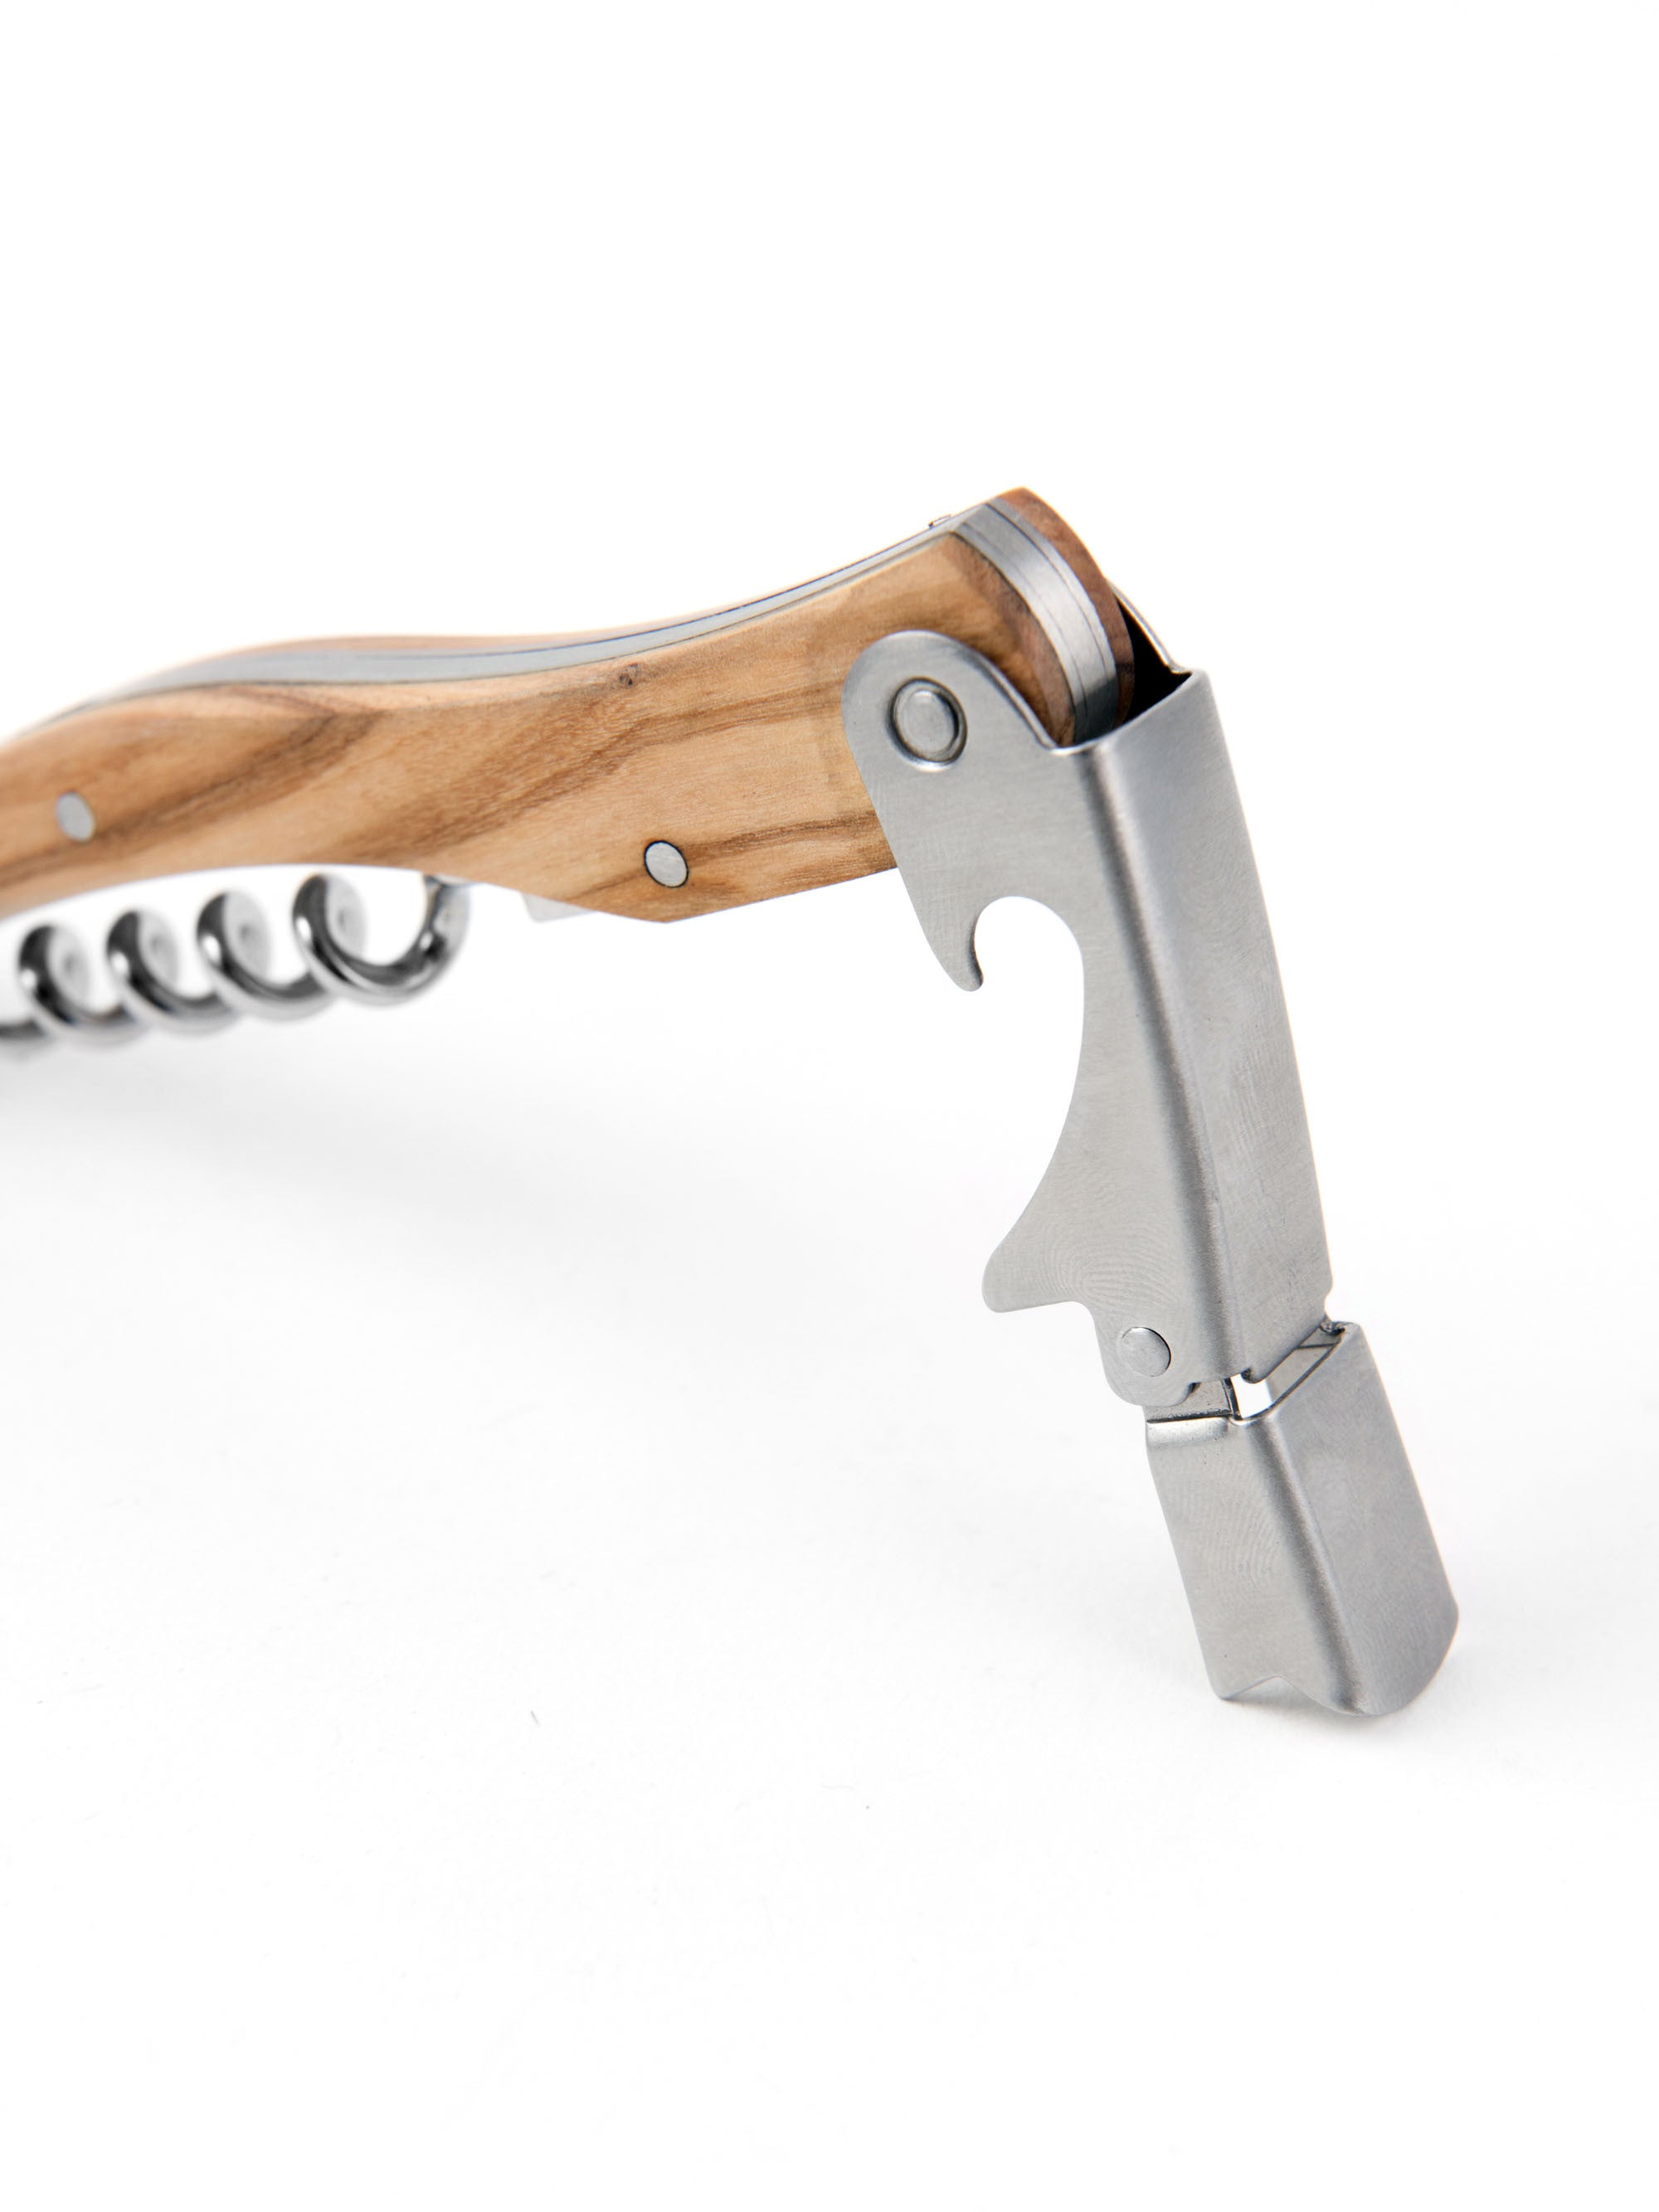 French Dry Goods Olivewood Corkscrew French Dry Goods 1519-0013_Olivewood_Corkscrew_G_f91f5cb3-a65d-498a-a606-ccb320923c48